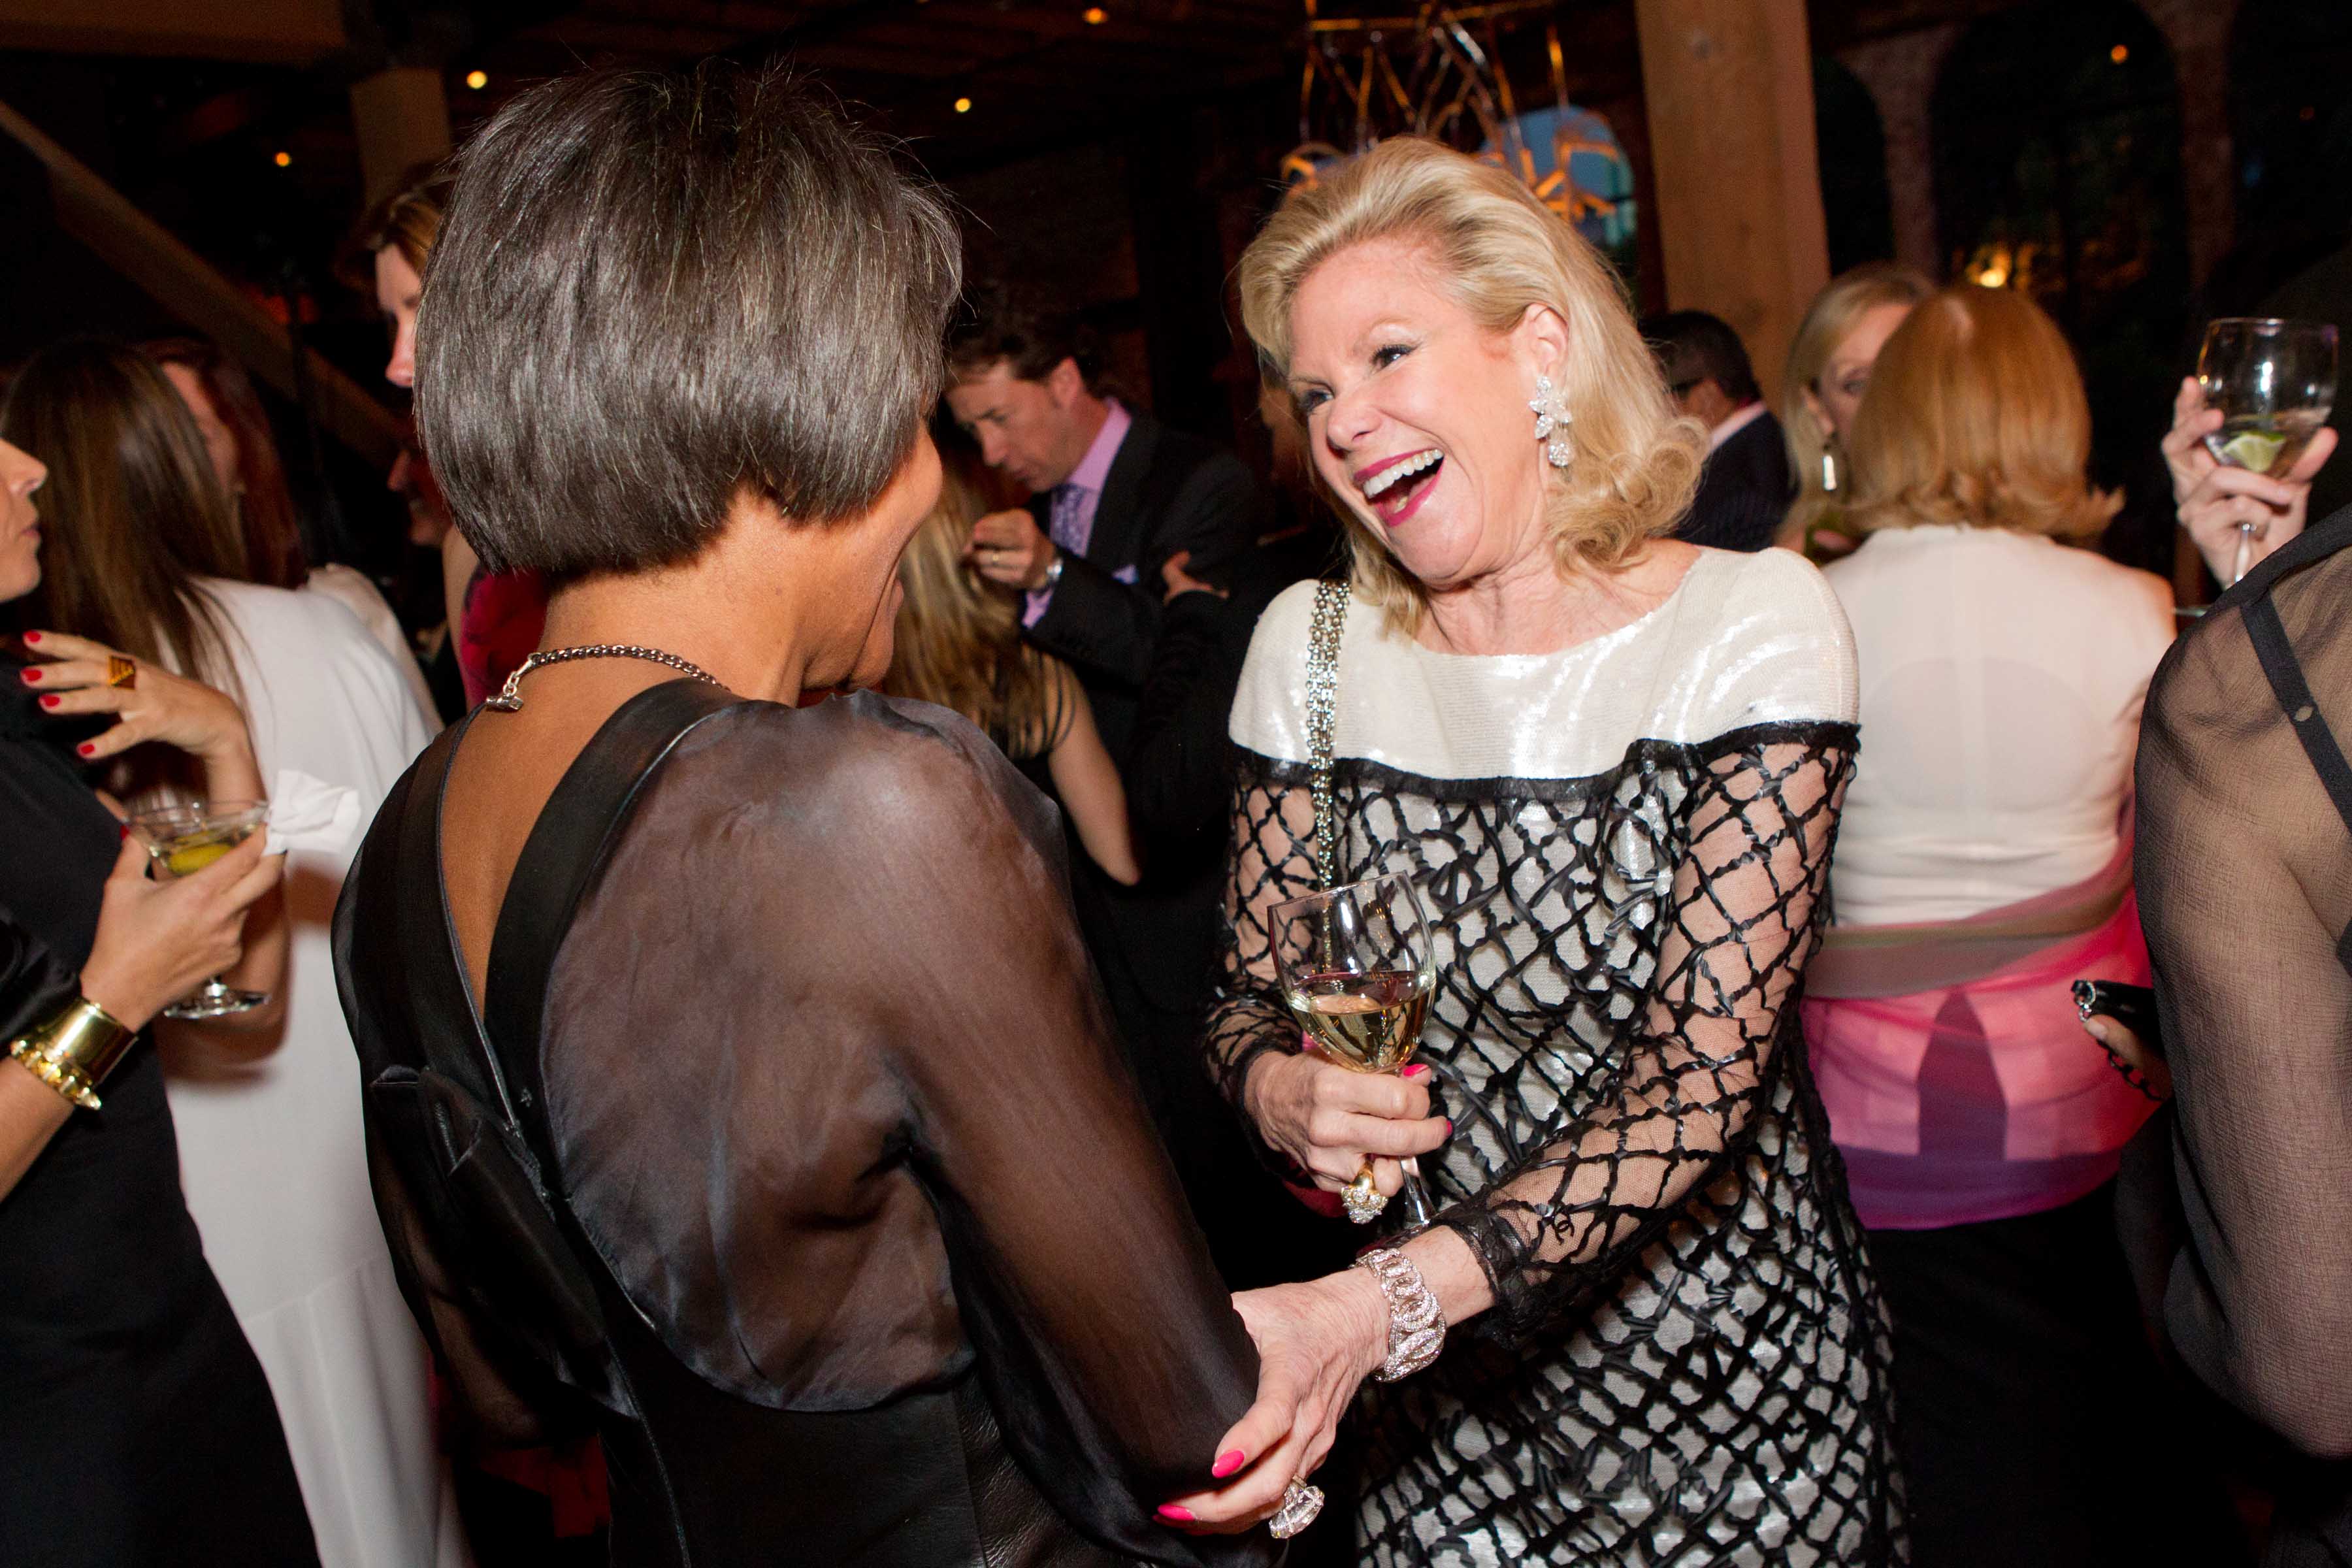 Jeana Toney, Dede Wilsey at VIP Dinner for Jean Paul Gaultier at the de Young Museum in 2012. Courtesy of Drew Altizer/patrickmcmullan.com.